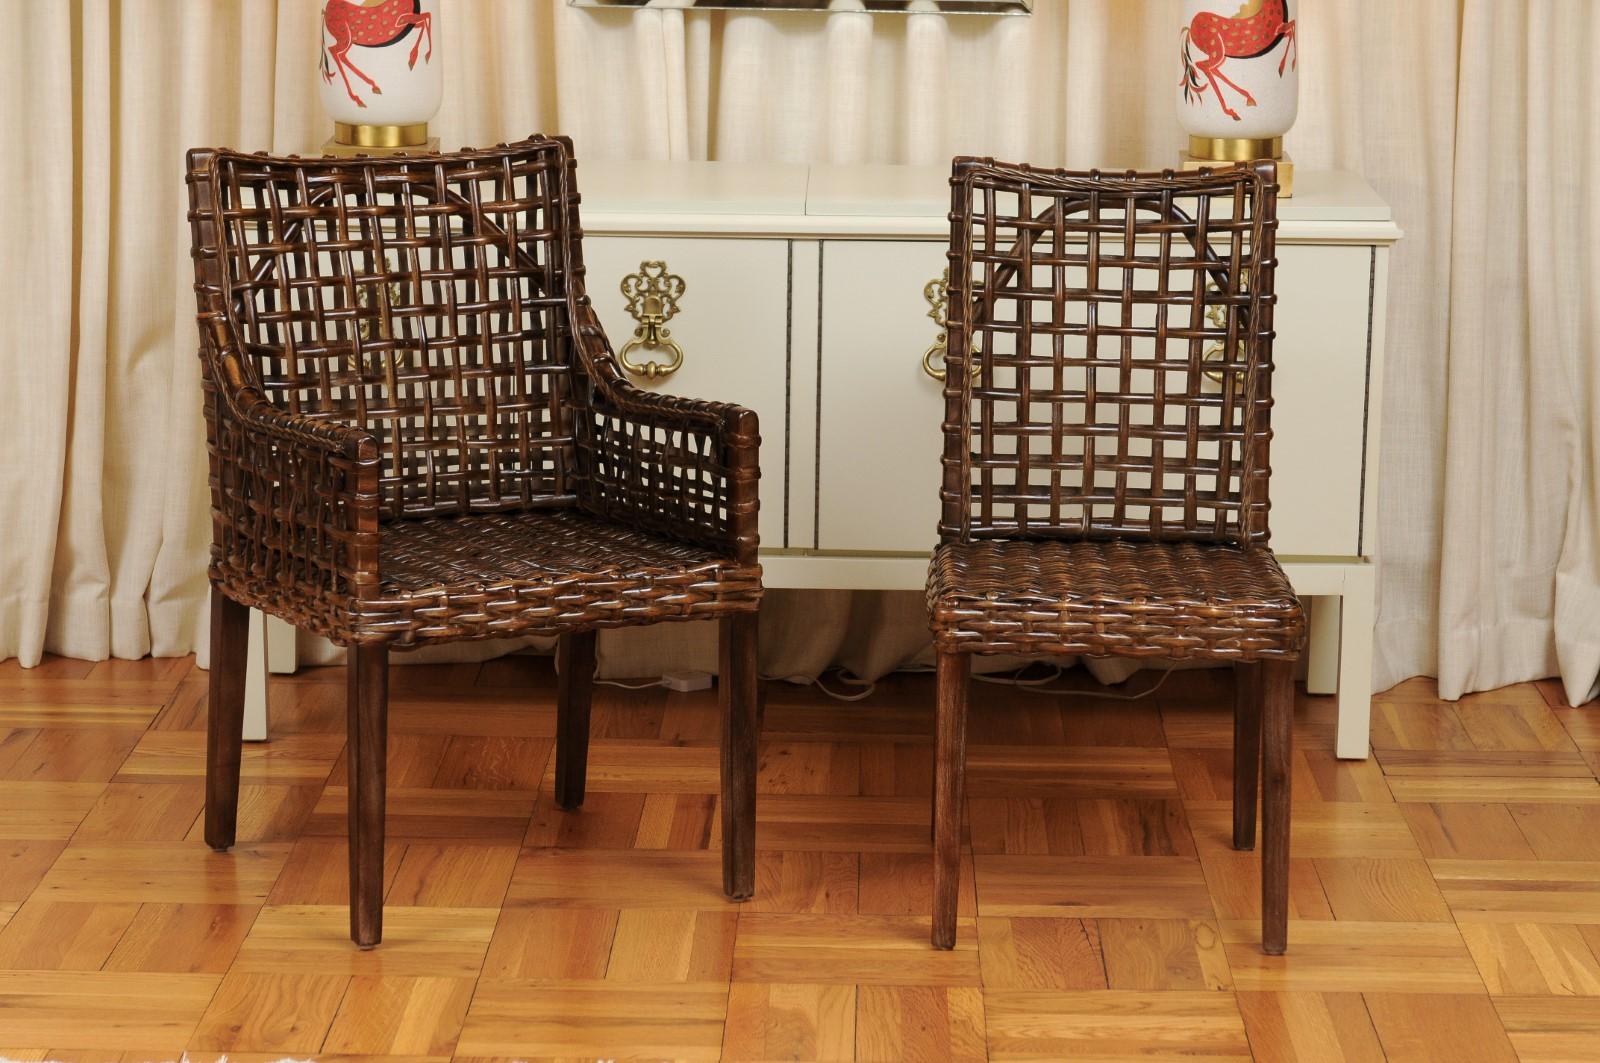 These magnificent dining chairs are shipped as professionally photographed and described in the listing narrative: meticulously professionally restored and installation ready. Expert custom upholstery service is available.

A stellar set of twelve